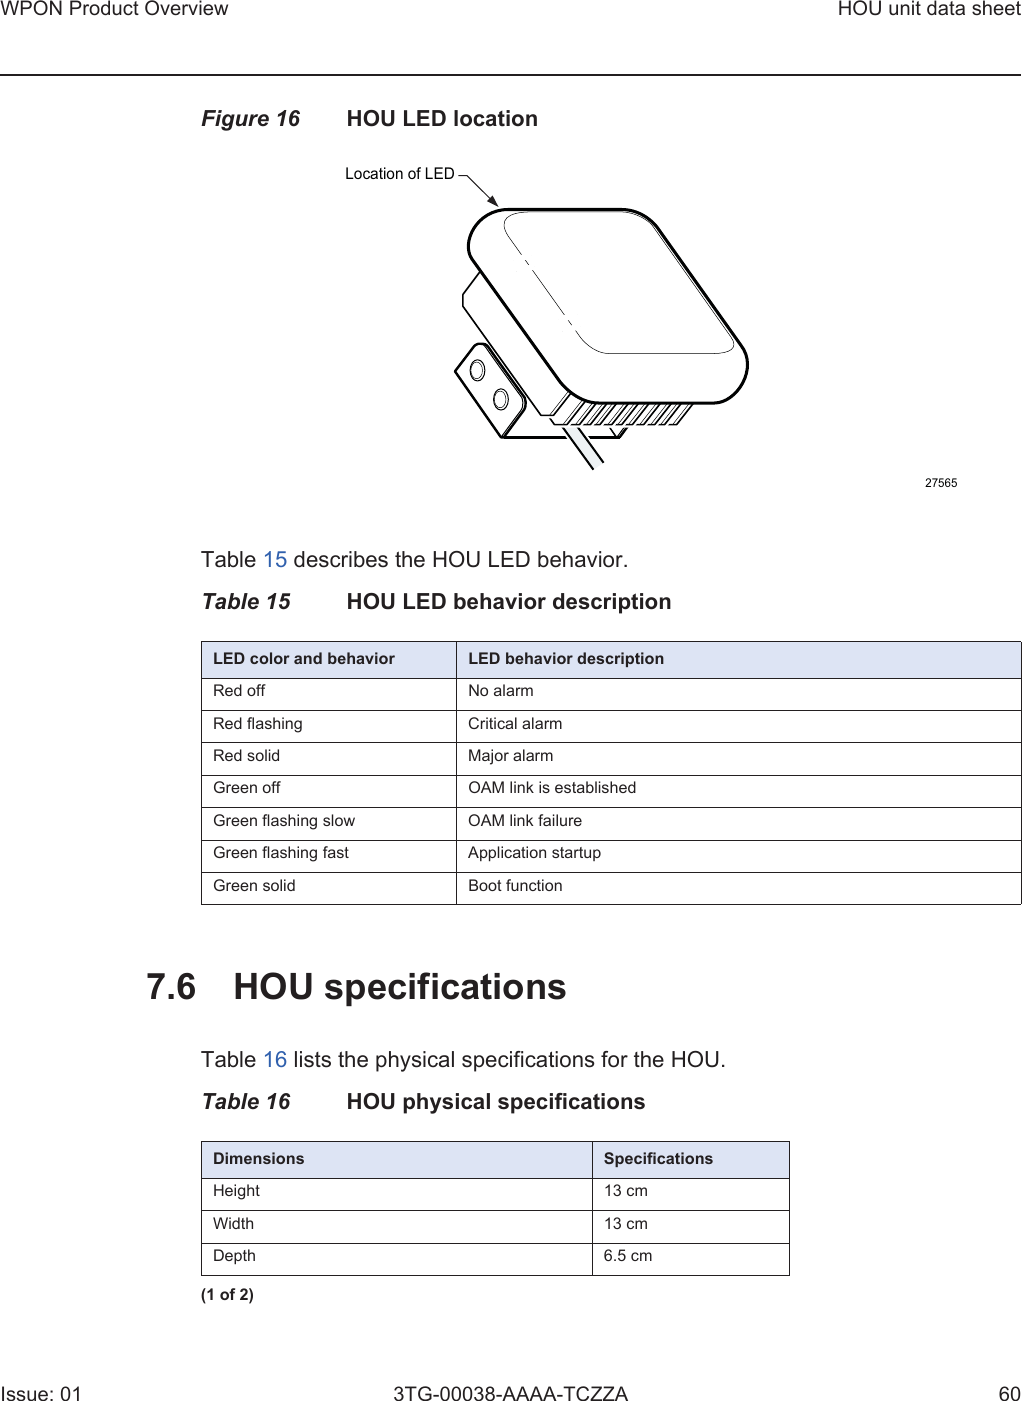 WPON Product Overview HOU unit data sheetIssue: 01 3TG-00038-AAAA-TCZZA 60Figure 16 HOU LED locationTable 15 describes the HOU LED behavior. Table 15 HOU LED behavior description7.6 HOU specificationsTable 16 lists the physical specifications for the HOU. Table 16 HOU physical specificationsLED color and behavior LED behavior descriptionRed off No alarm Red flashing Critical alarmRed solid Major alarmGreen off OAM link is established Green flashing slow OAM link failureGreen flashing fast Application startup Green solid Boot function27565Location of LEDDimensions SpecificationsHeight 13 cmWidth 13 cmDepth 6.5 cm(1 of 2)